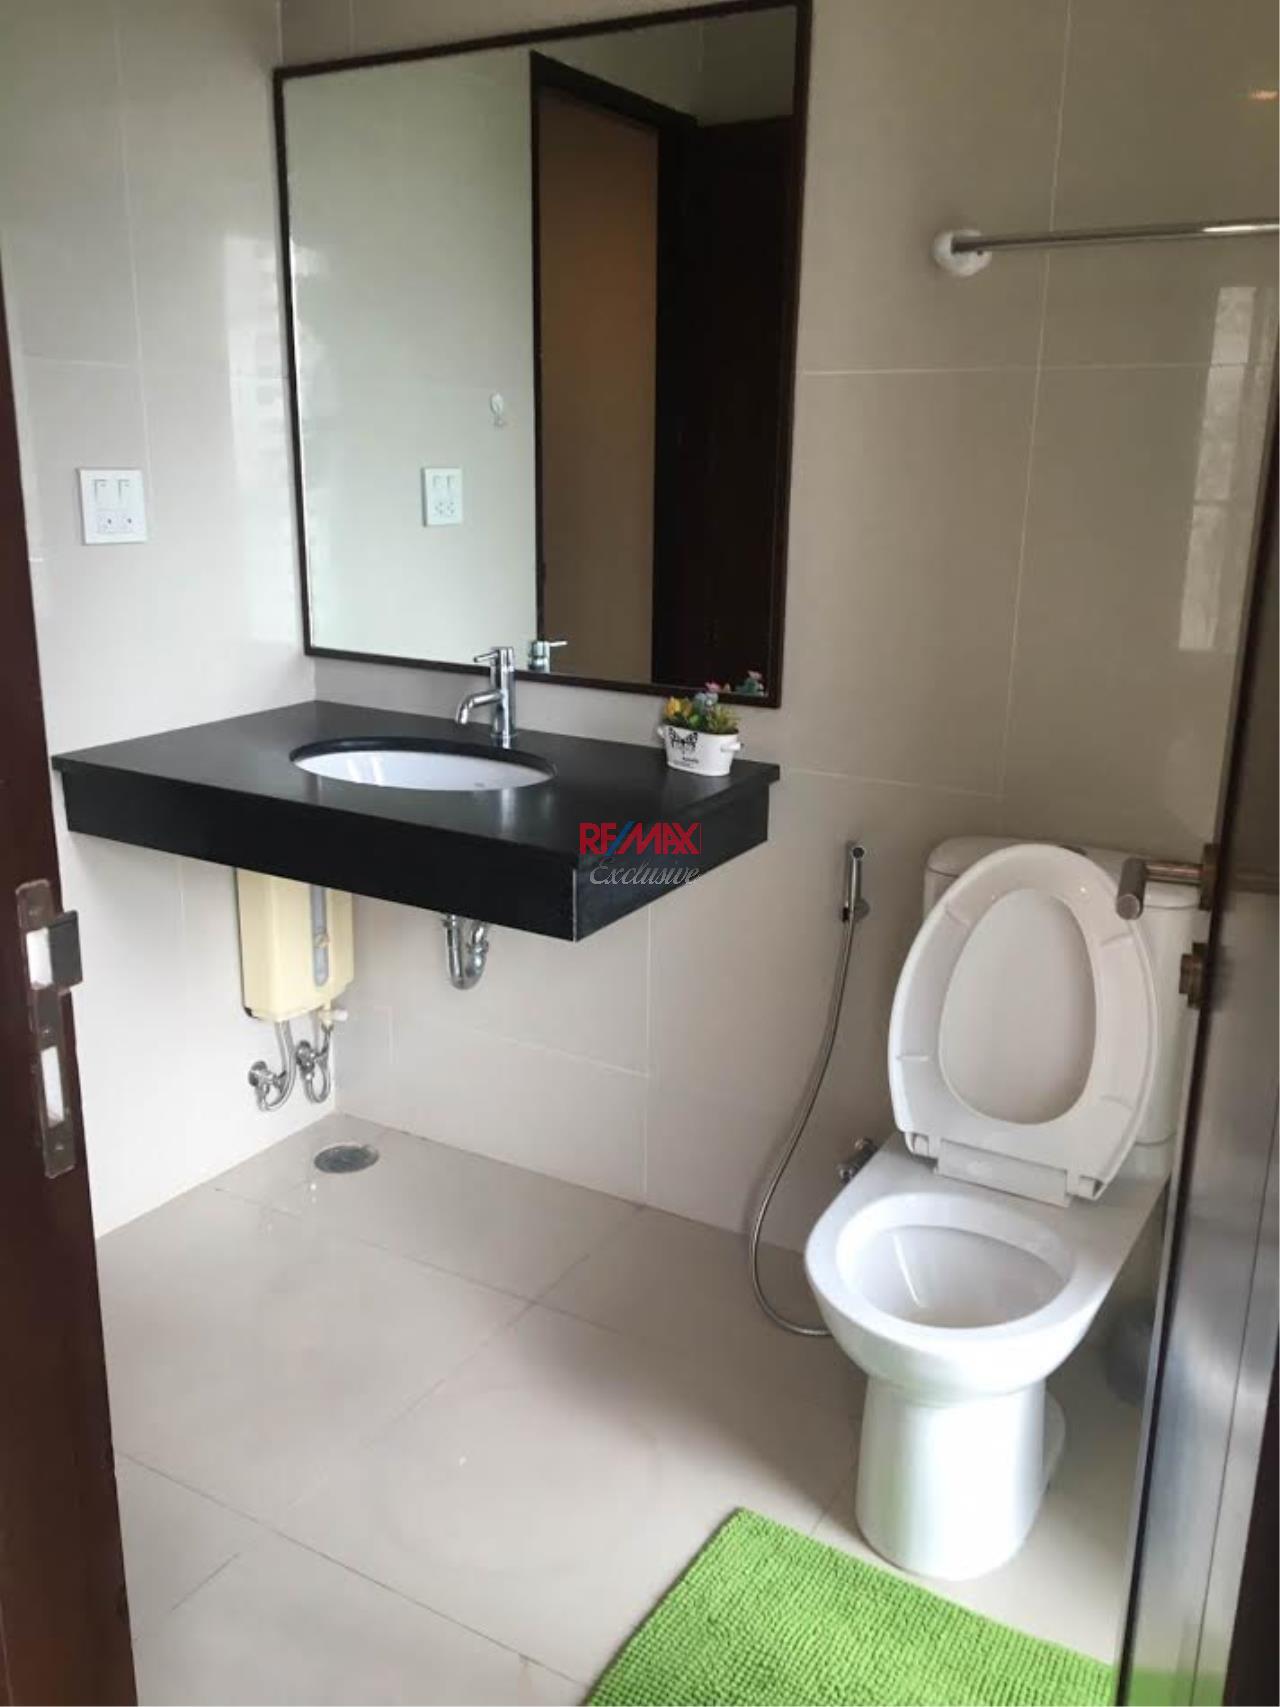 RE/MAX Exclusive Agency's Noble Ora Newly Renovated 2 Bedroom for Sale 12,750,000 THB 8